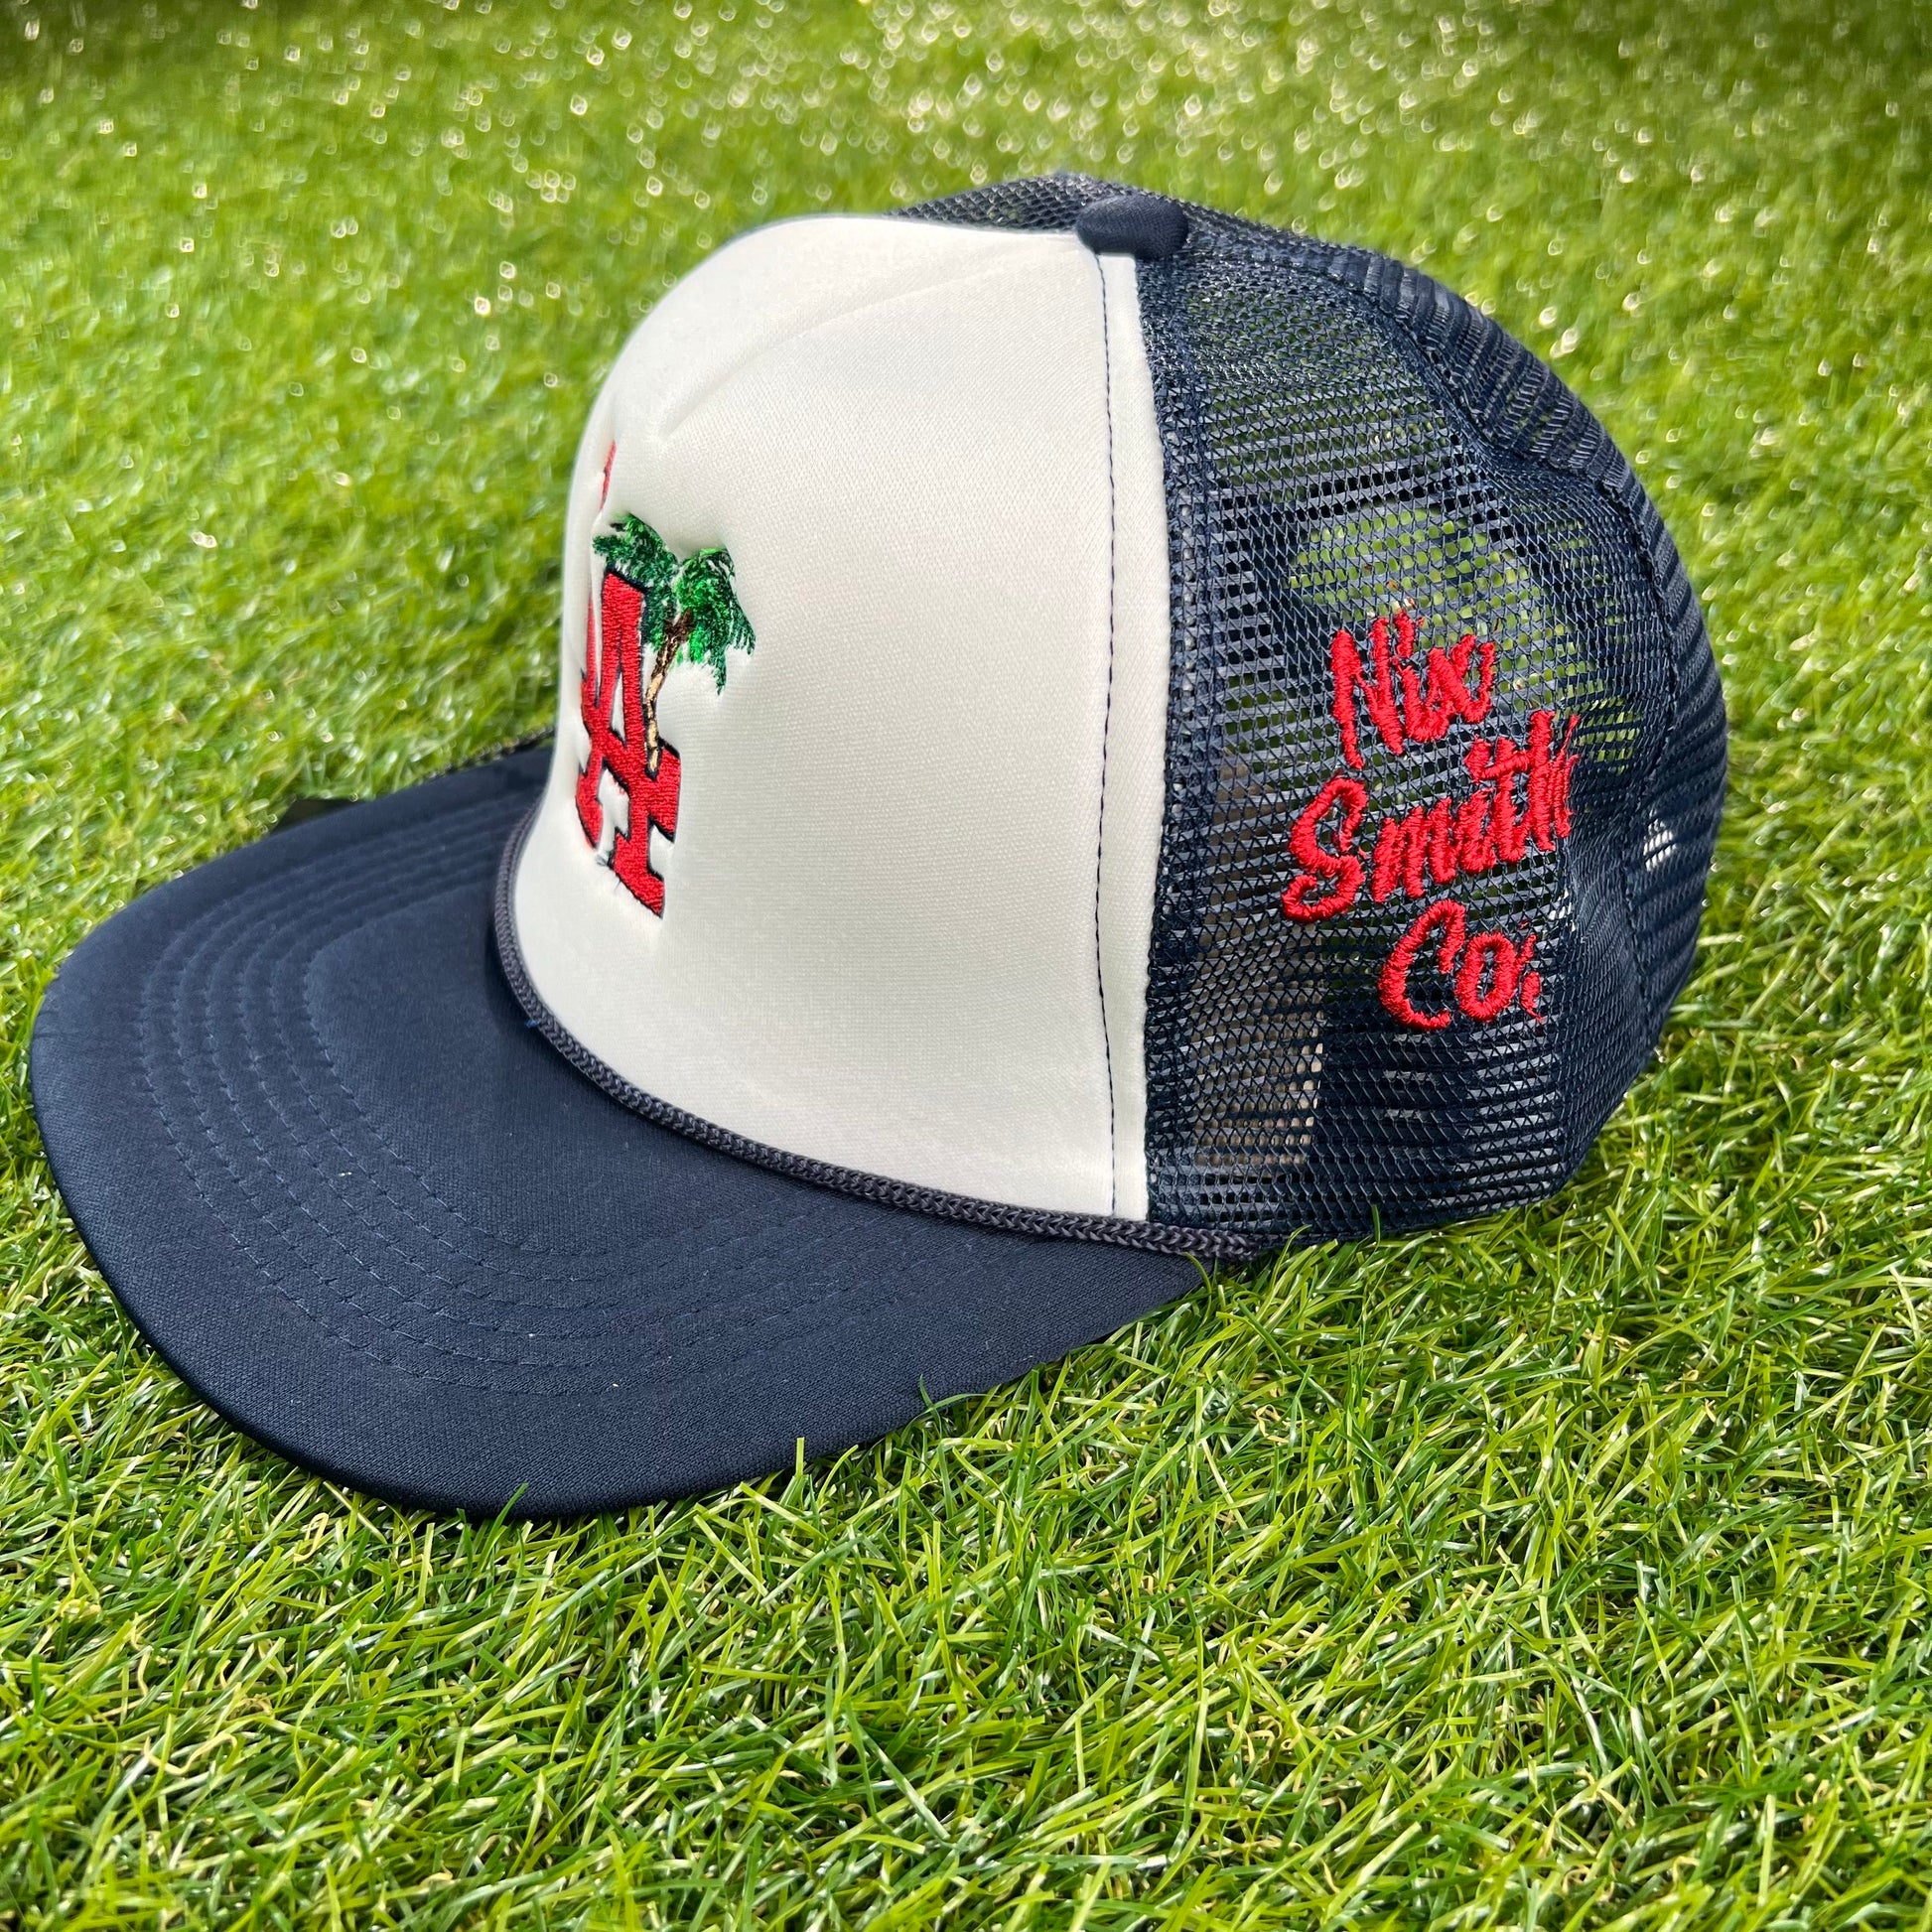 L.A, Hats, Trucker. Style, Snapback, Men, Boys, Teens, Gifts, Blue, White, Red, Wmns, Girls, Boys, White and Blue Hats, Palm Tree, Red White And Blue Hats, Hat, Nix Smith Co, Urban,